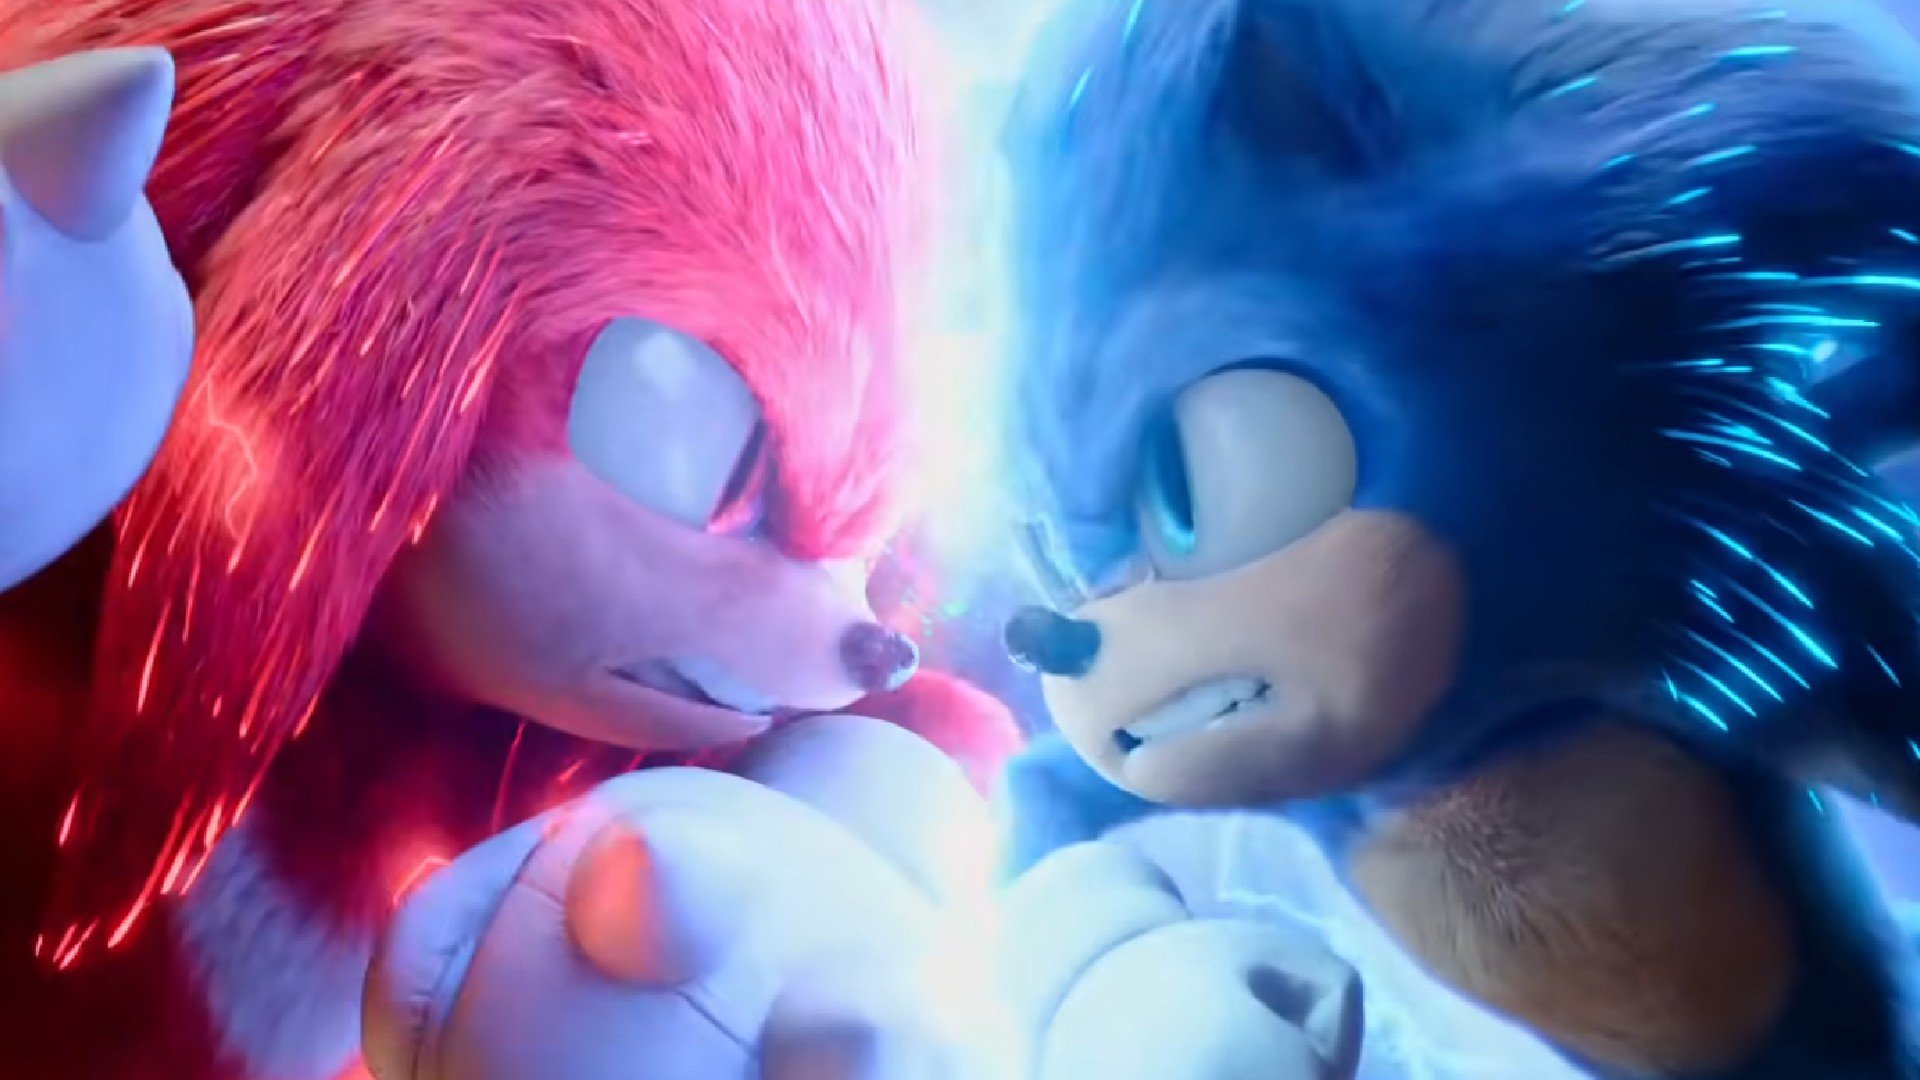 Sonic The Hedgehog 2' Poster Teases A Four Way Face Off